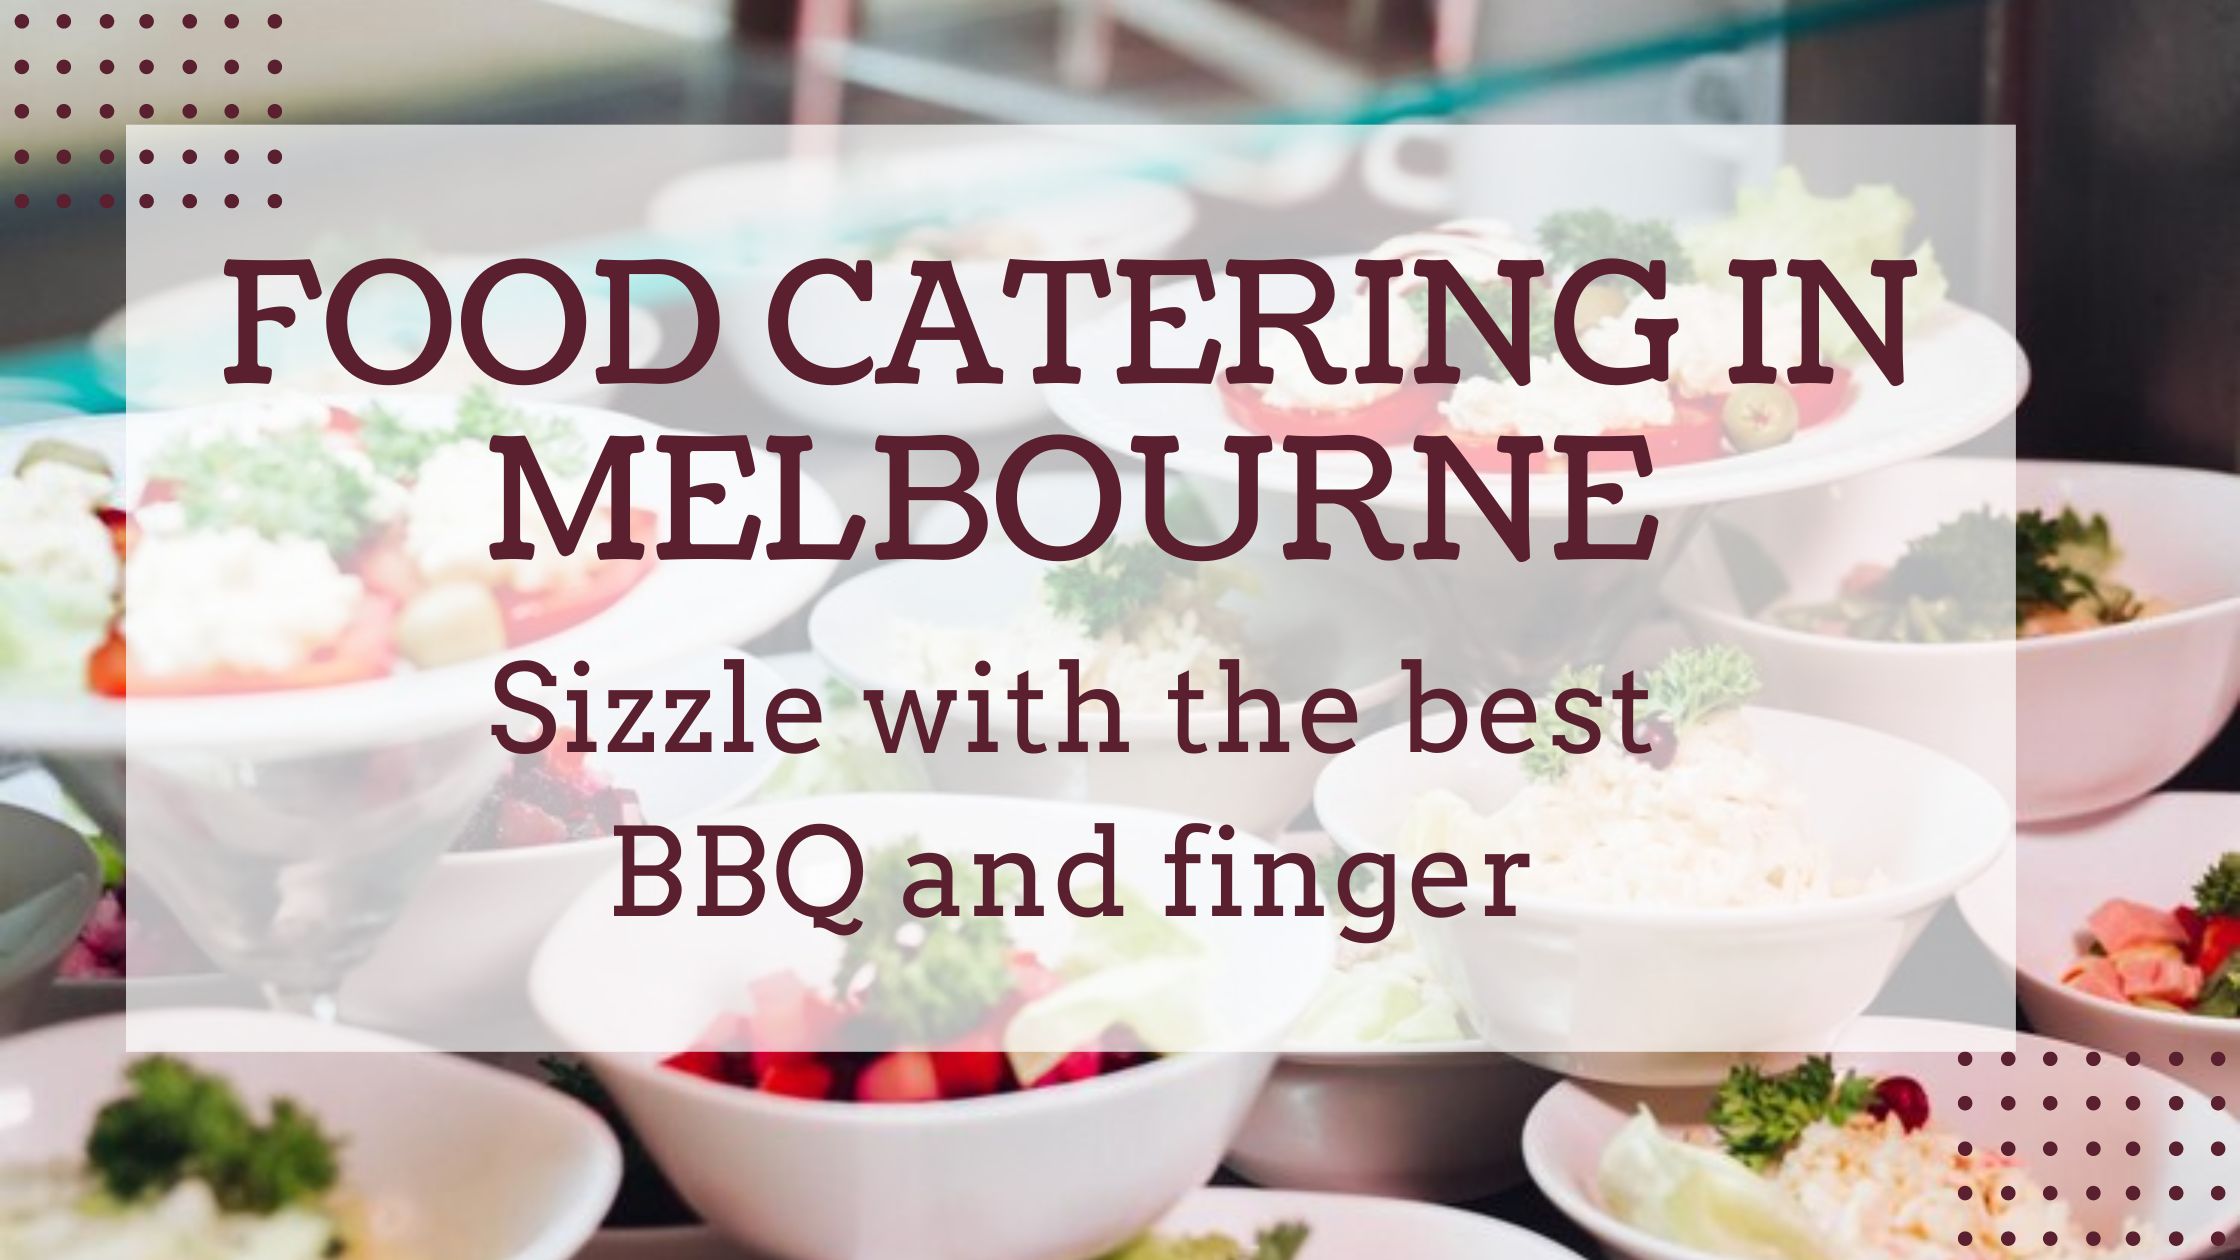 Sizzle with the best BBQ and finger food catering in Melbourne